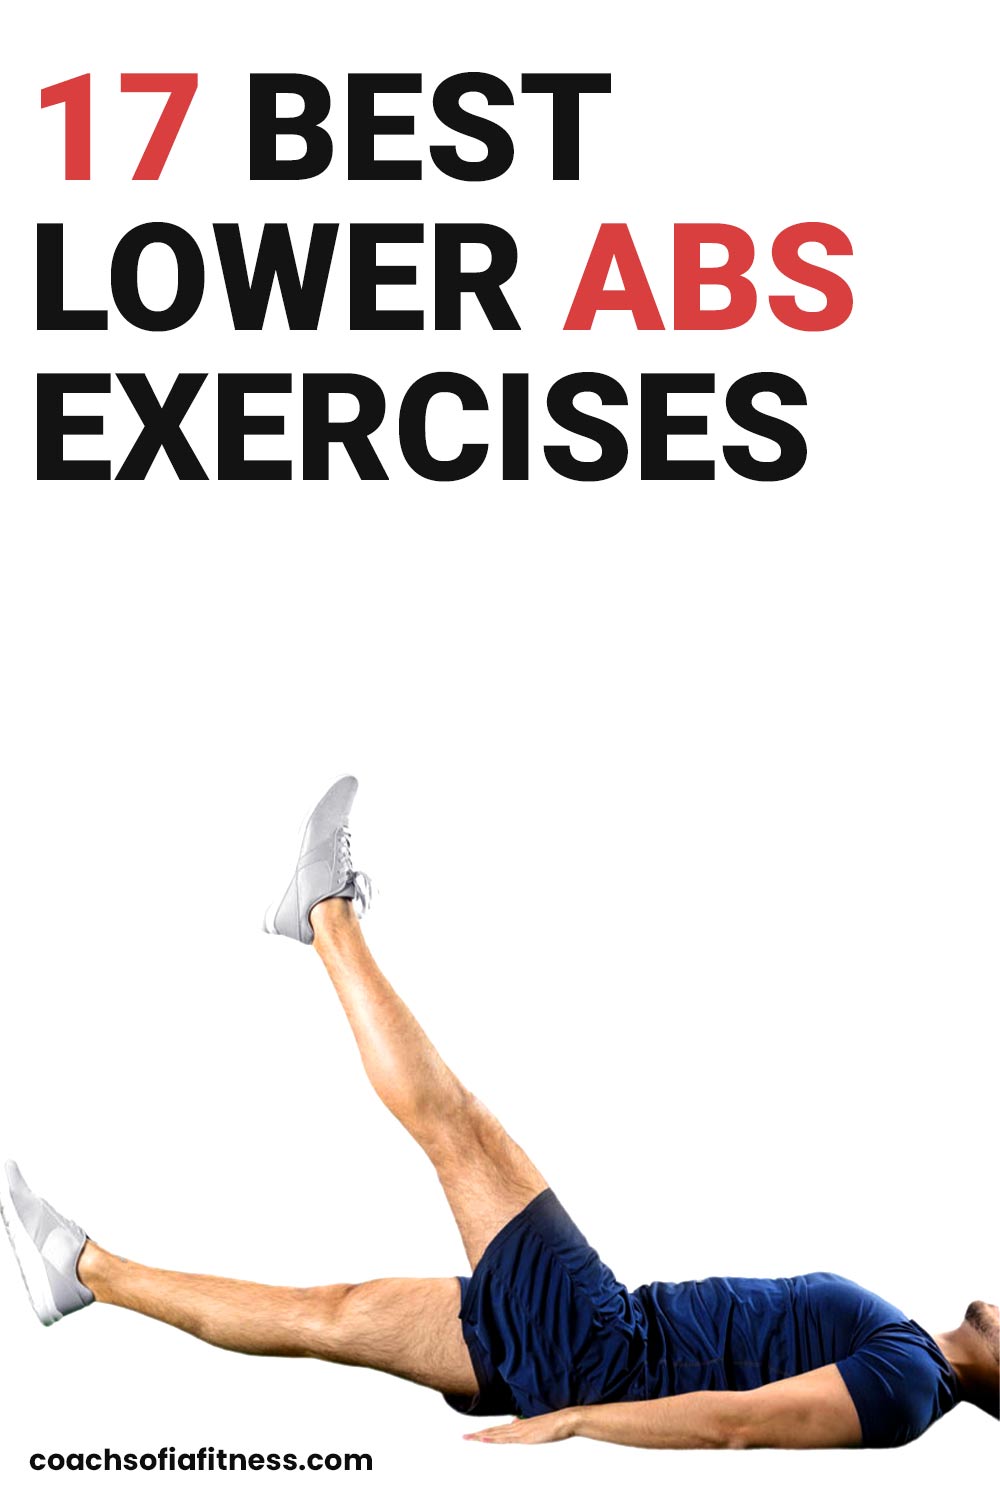 16 Standing Ab Exercises From Trainers To Strengthen Your Core